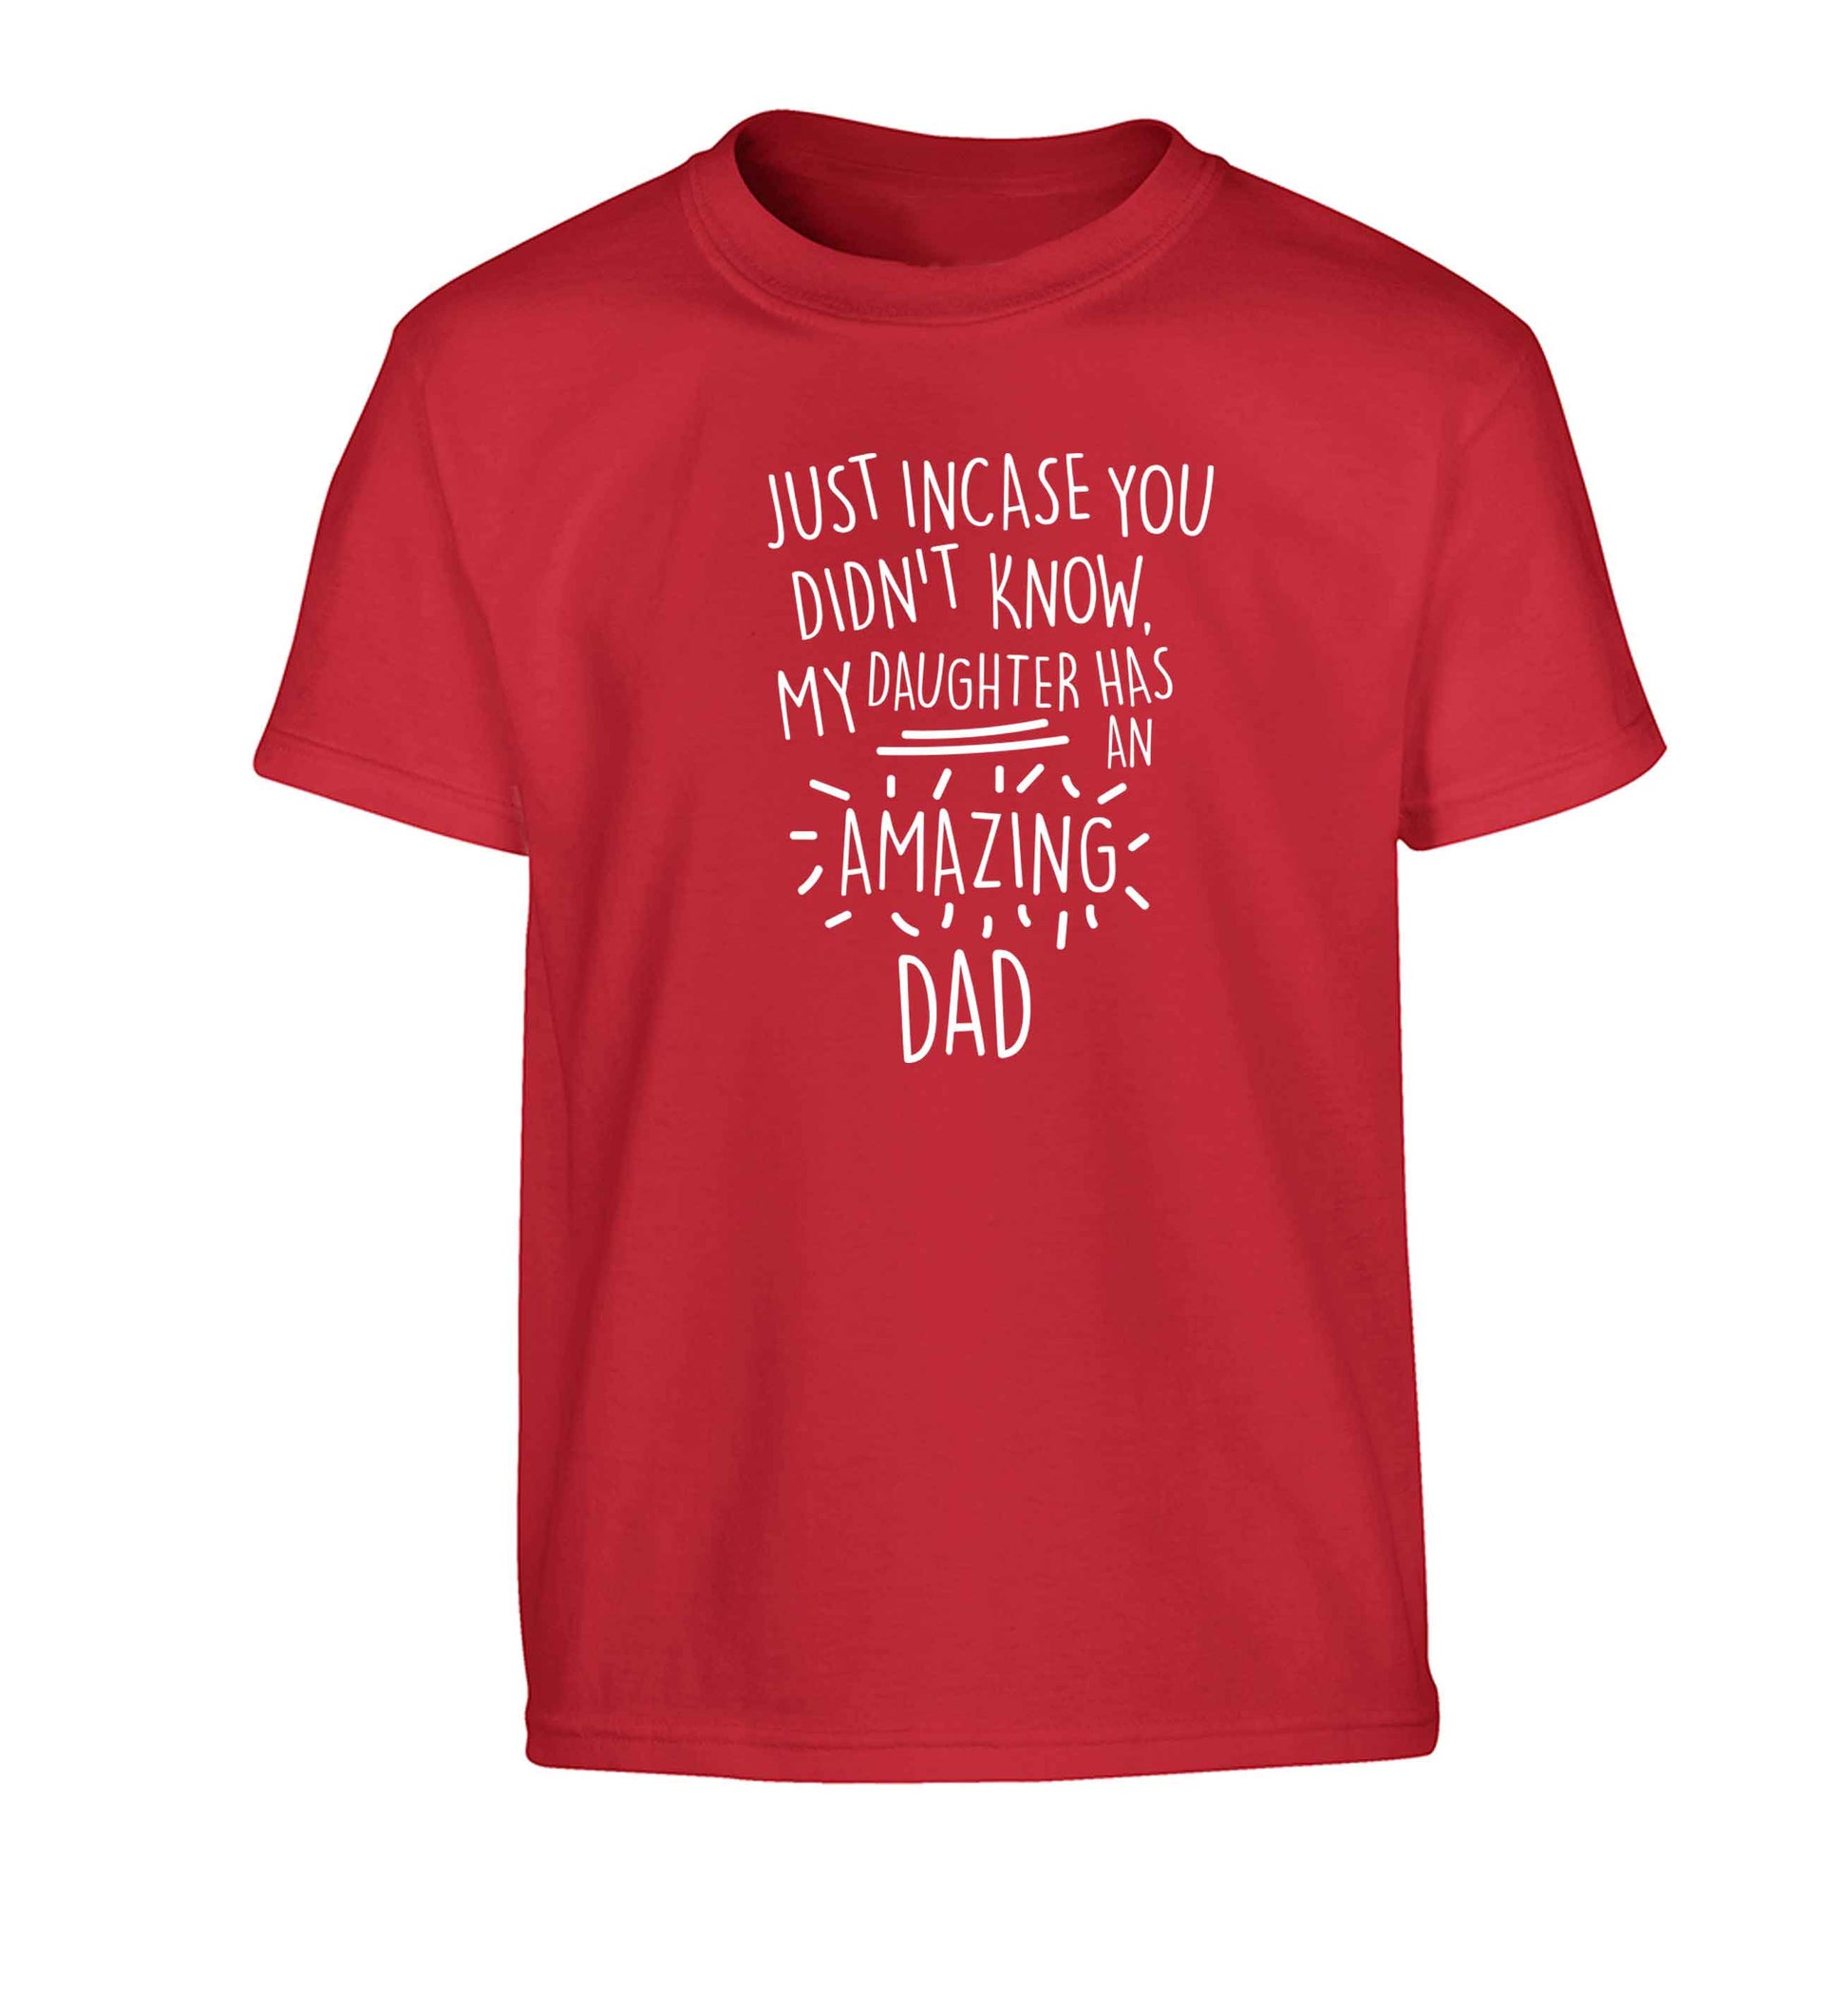 Just incase you didn't know my daughter has an amazing dad Children's red Tshirt 12-13 Years